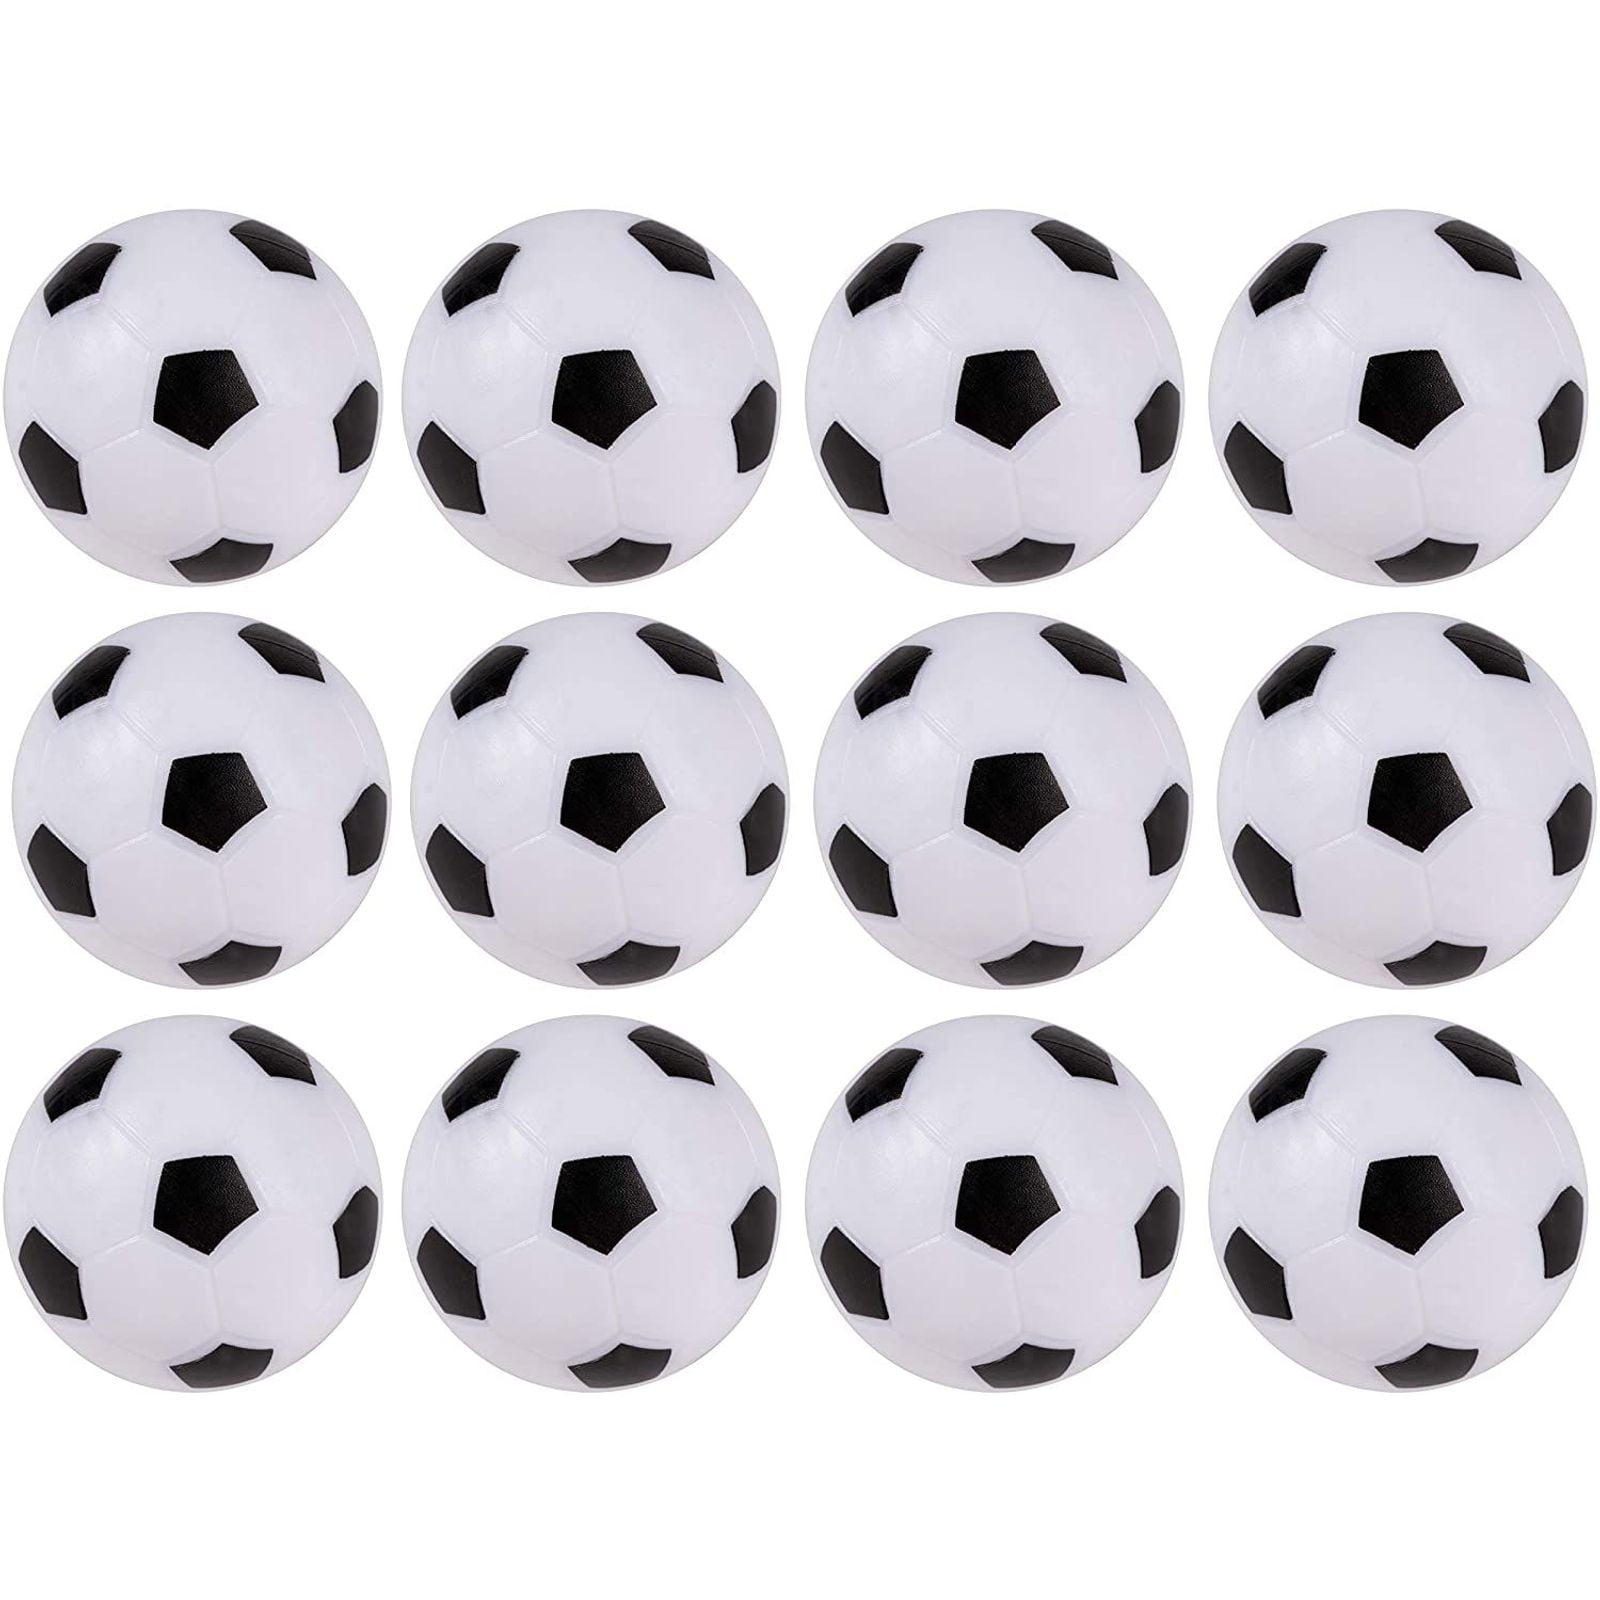 12Pcs/Set Small Table Soccer Foosballs Replacement Balls Colorful 60mm NEW LT 